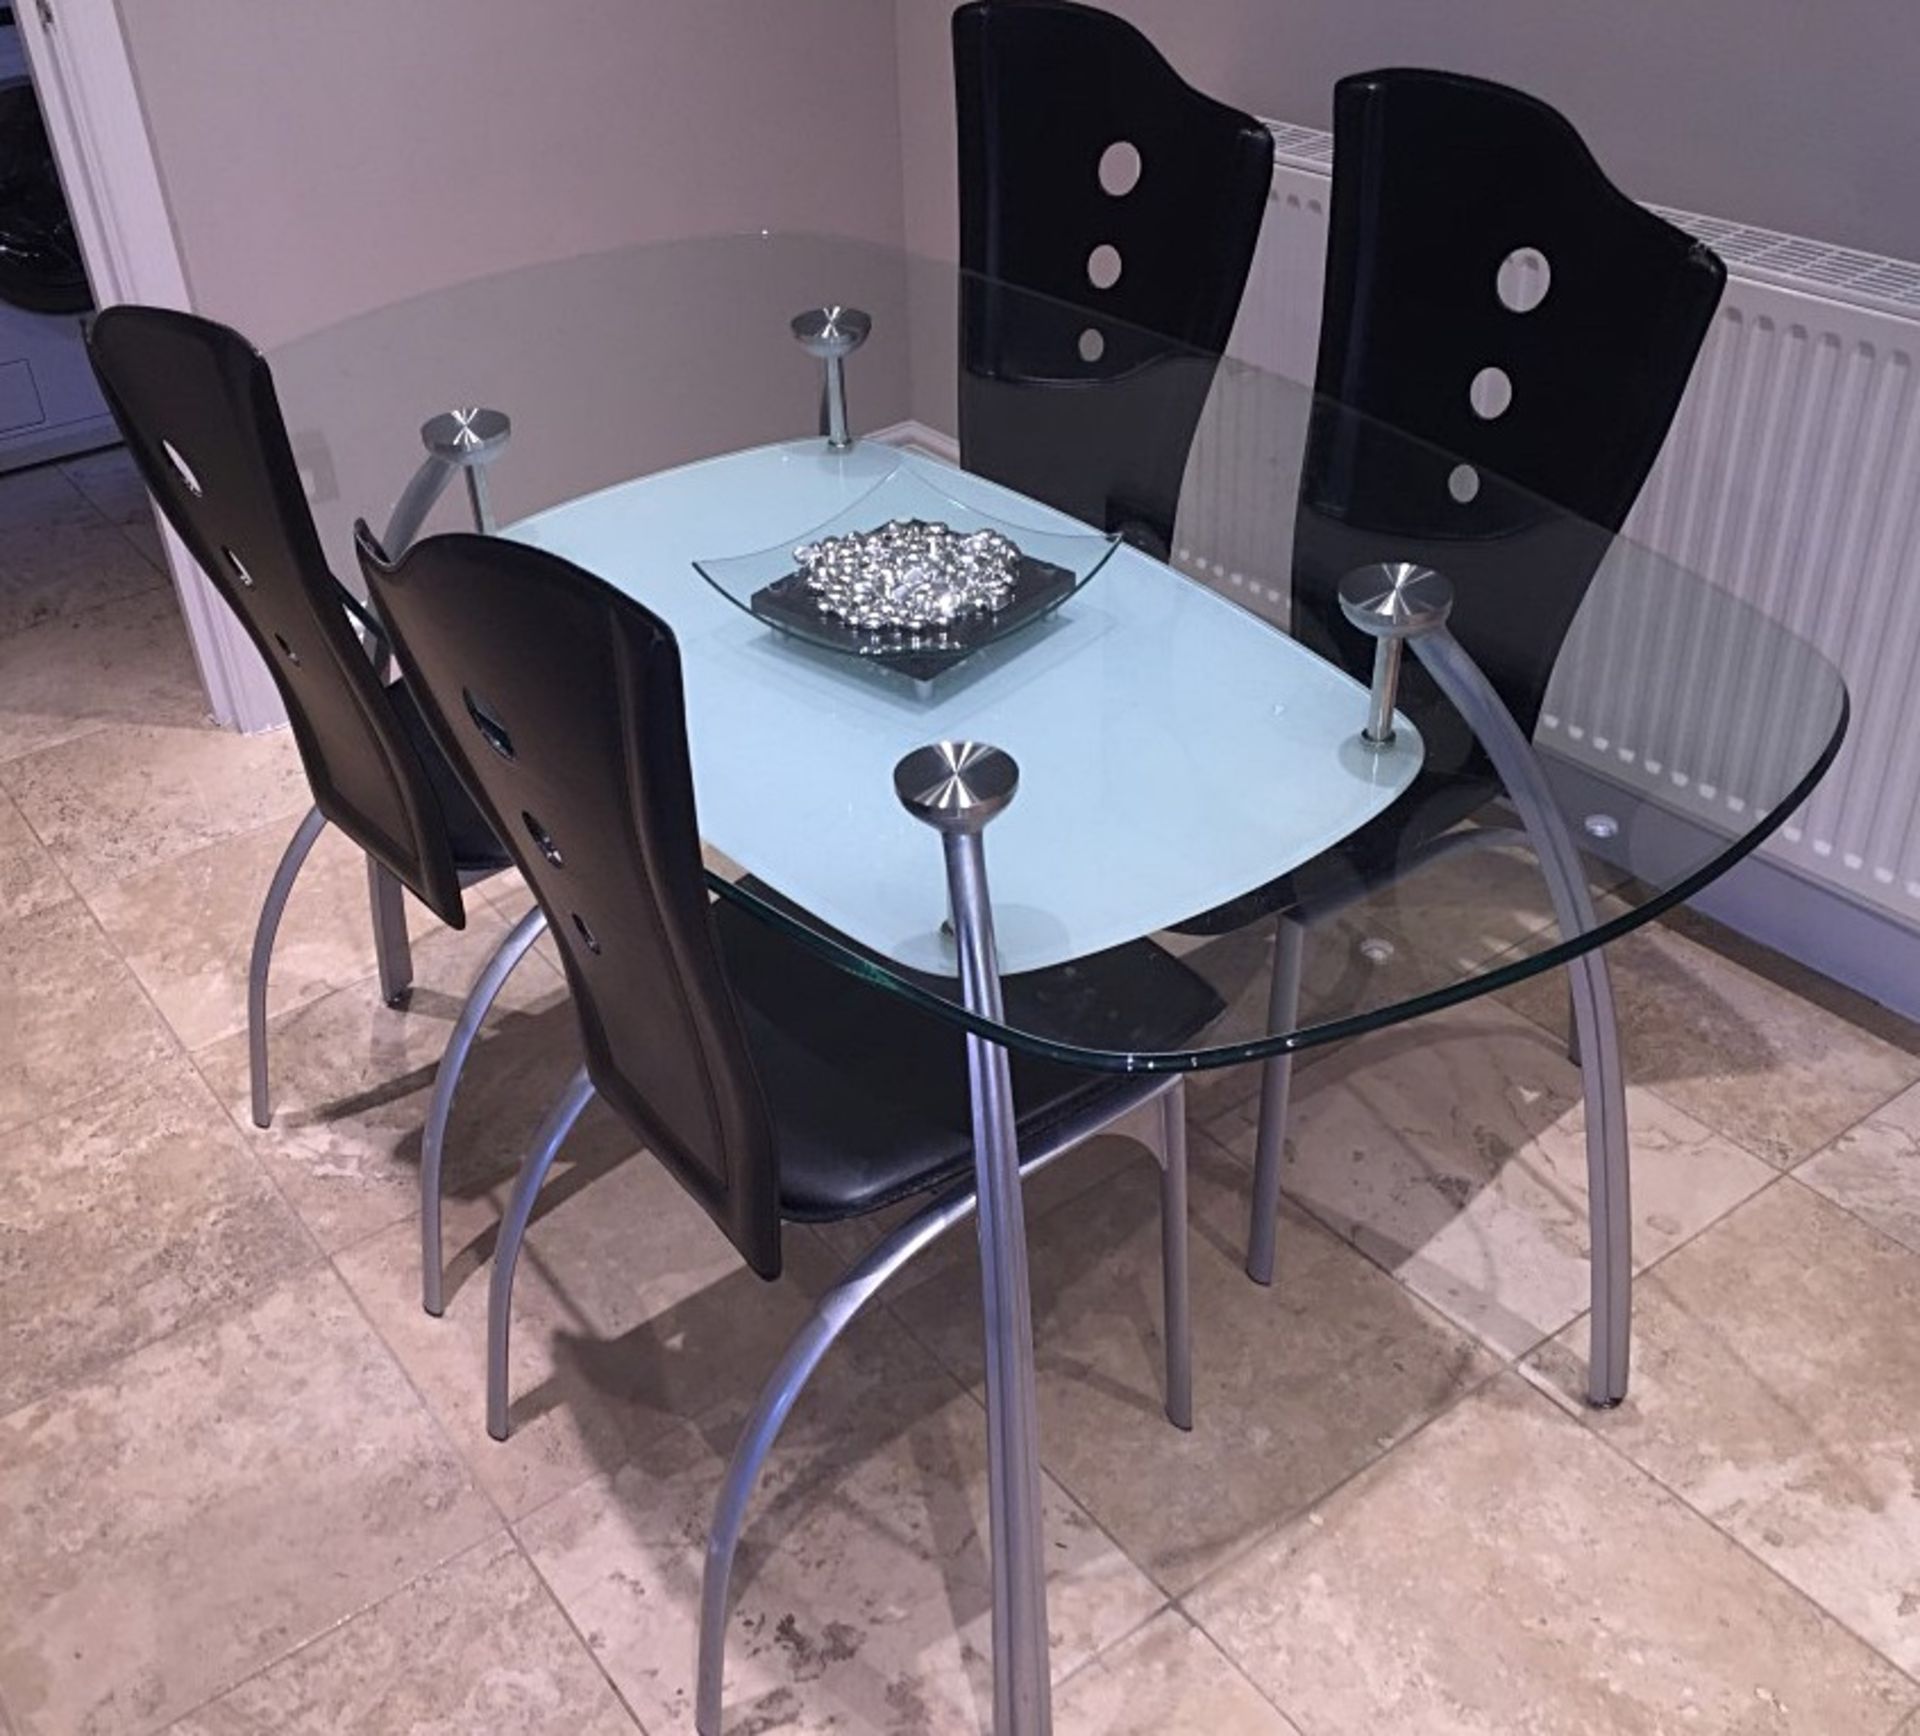 1 x Designer Glass-topped Dining Table And Chairs - Dimensions: 150cm x 84cm x Height 75cm Pls 4 - Image 2 of 5